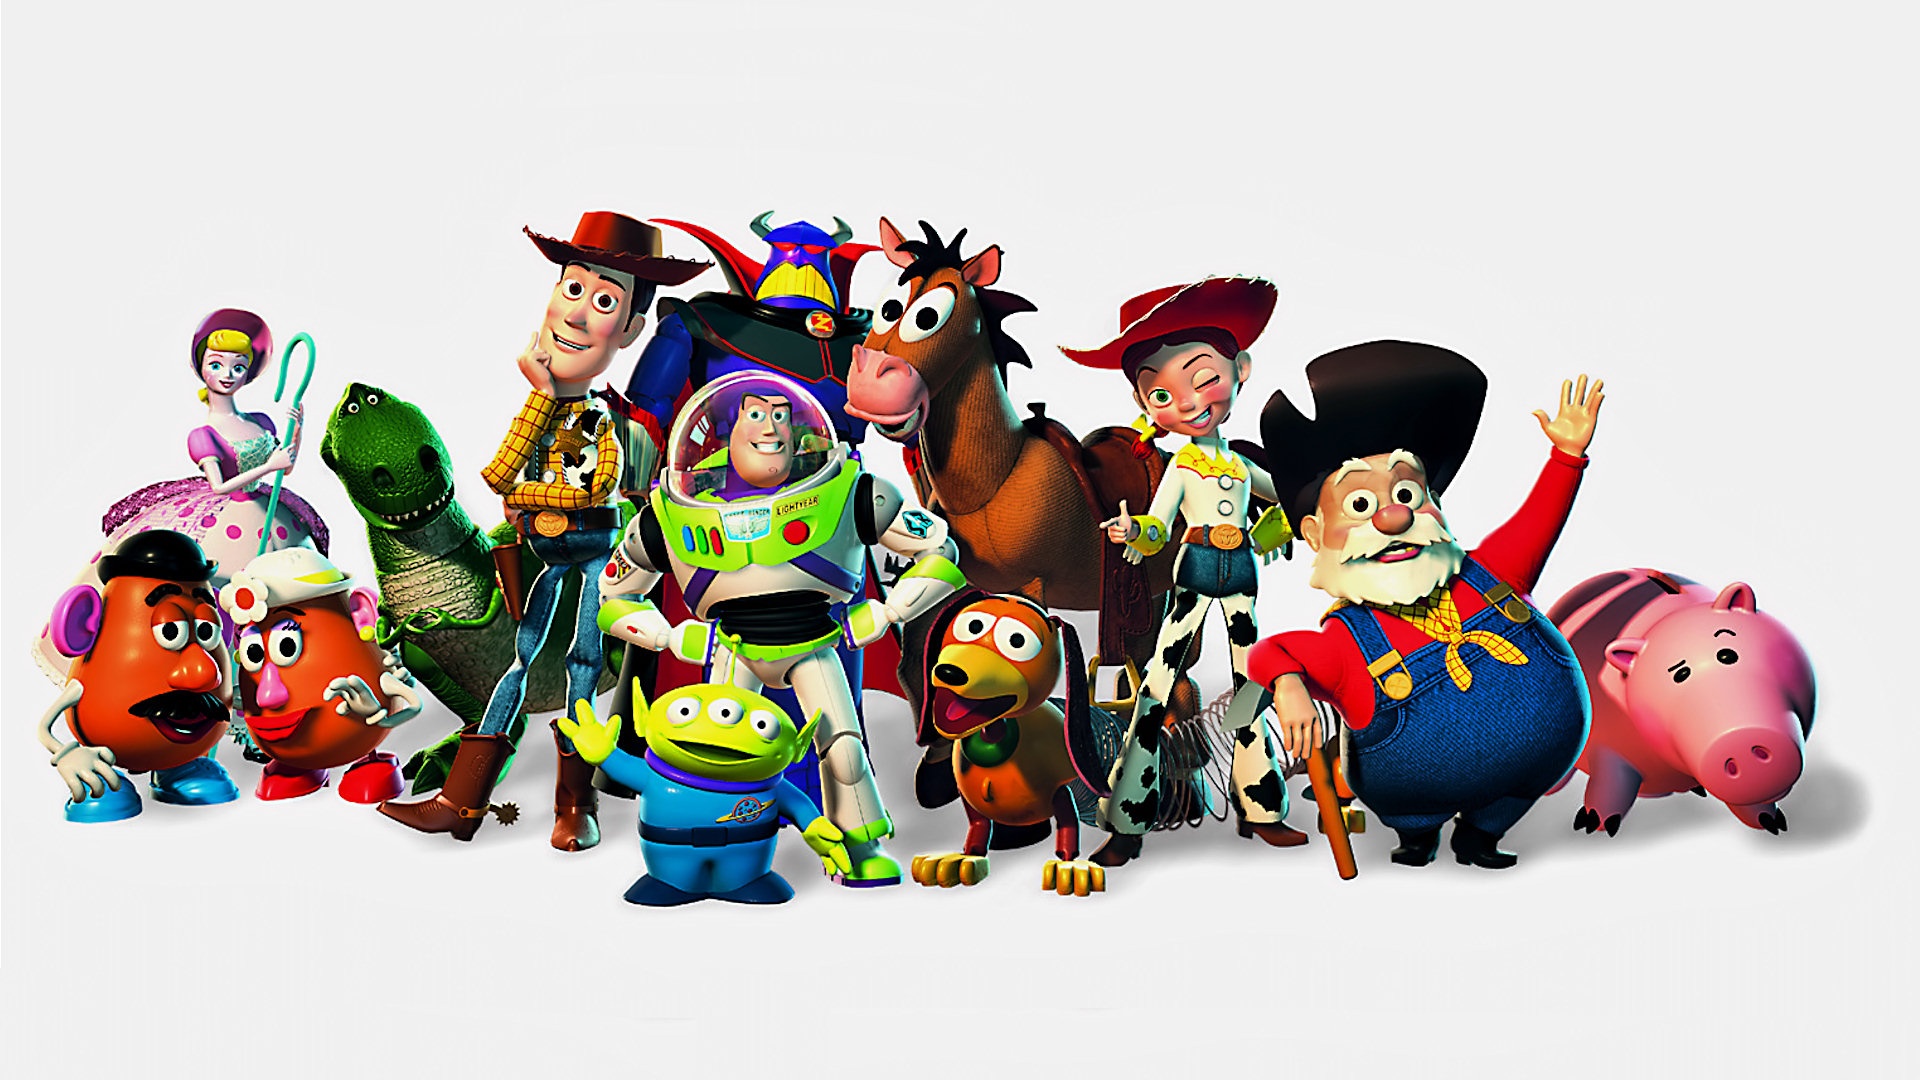 Toy Story 4 will be a 'romantic comedy'